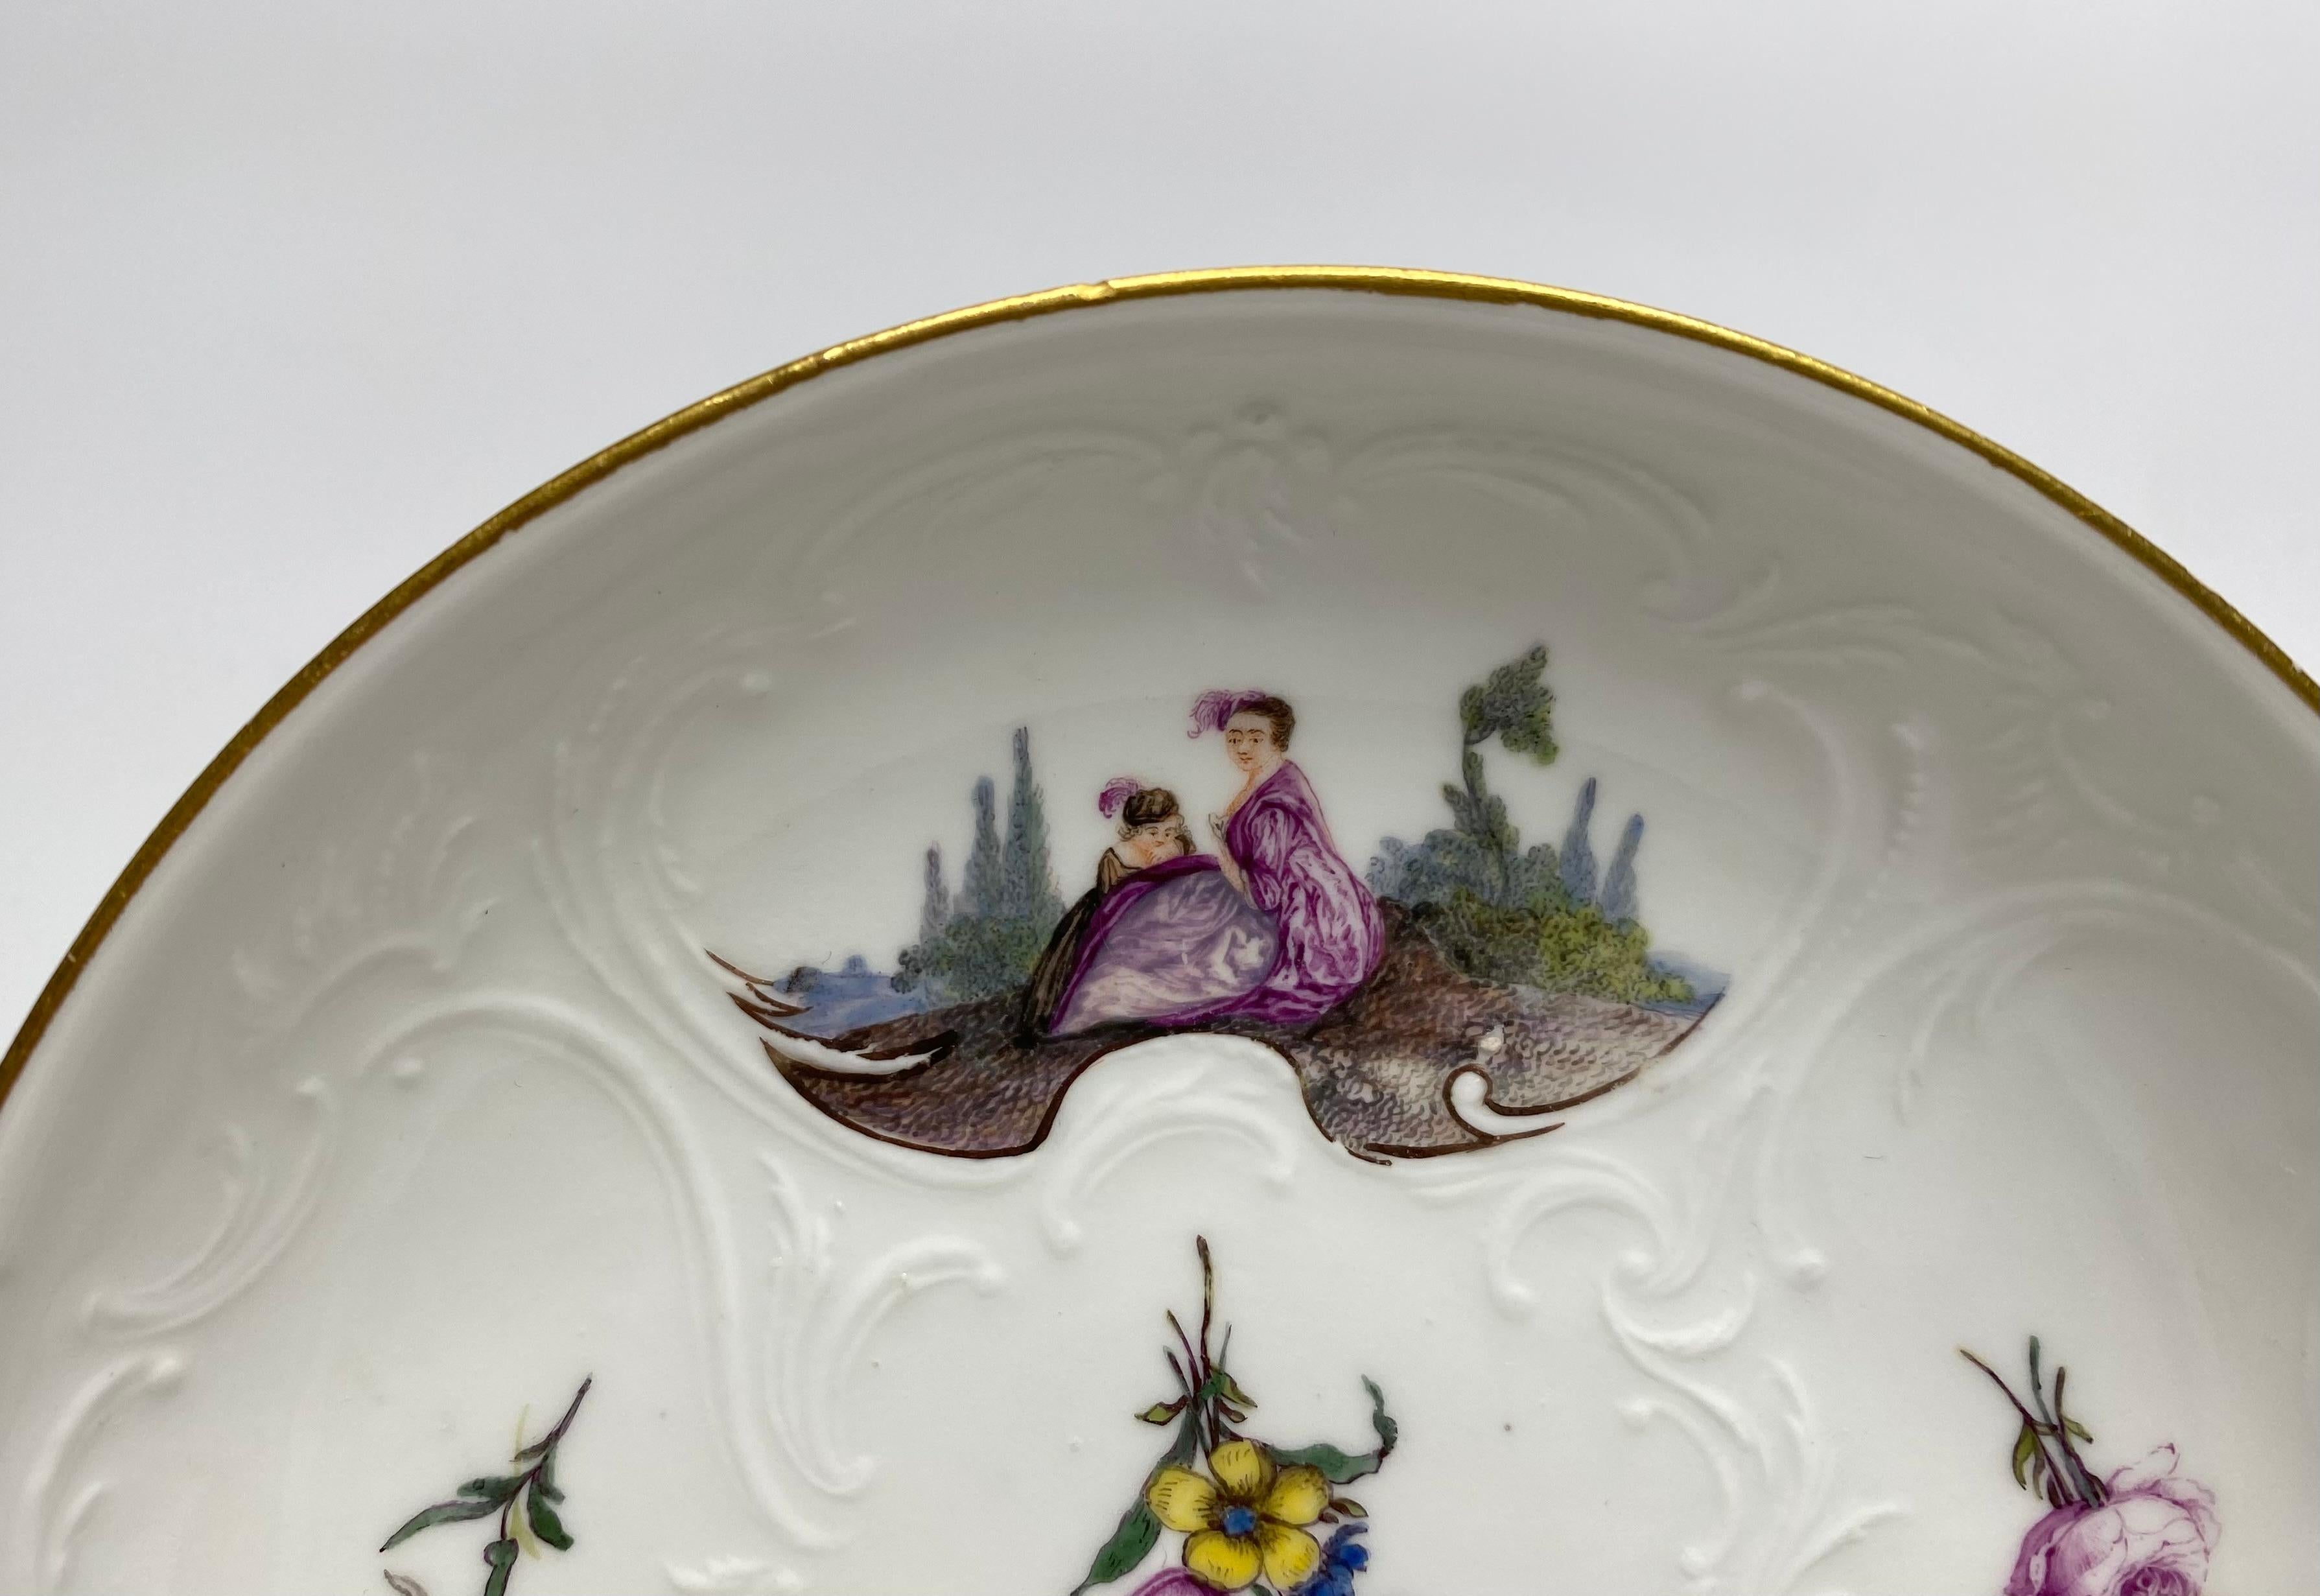 Mid-18th Century Meissen porcelain cup and saucer, c. 1740.